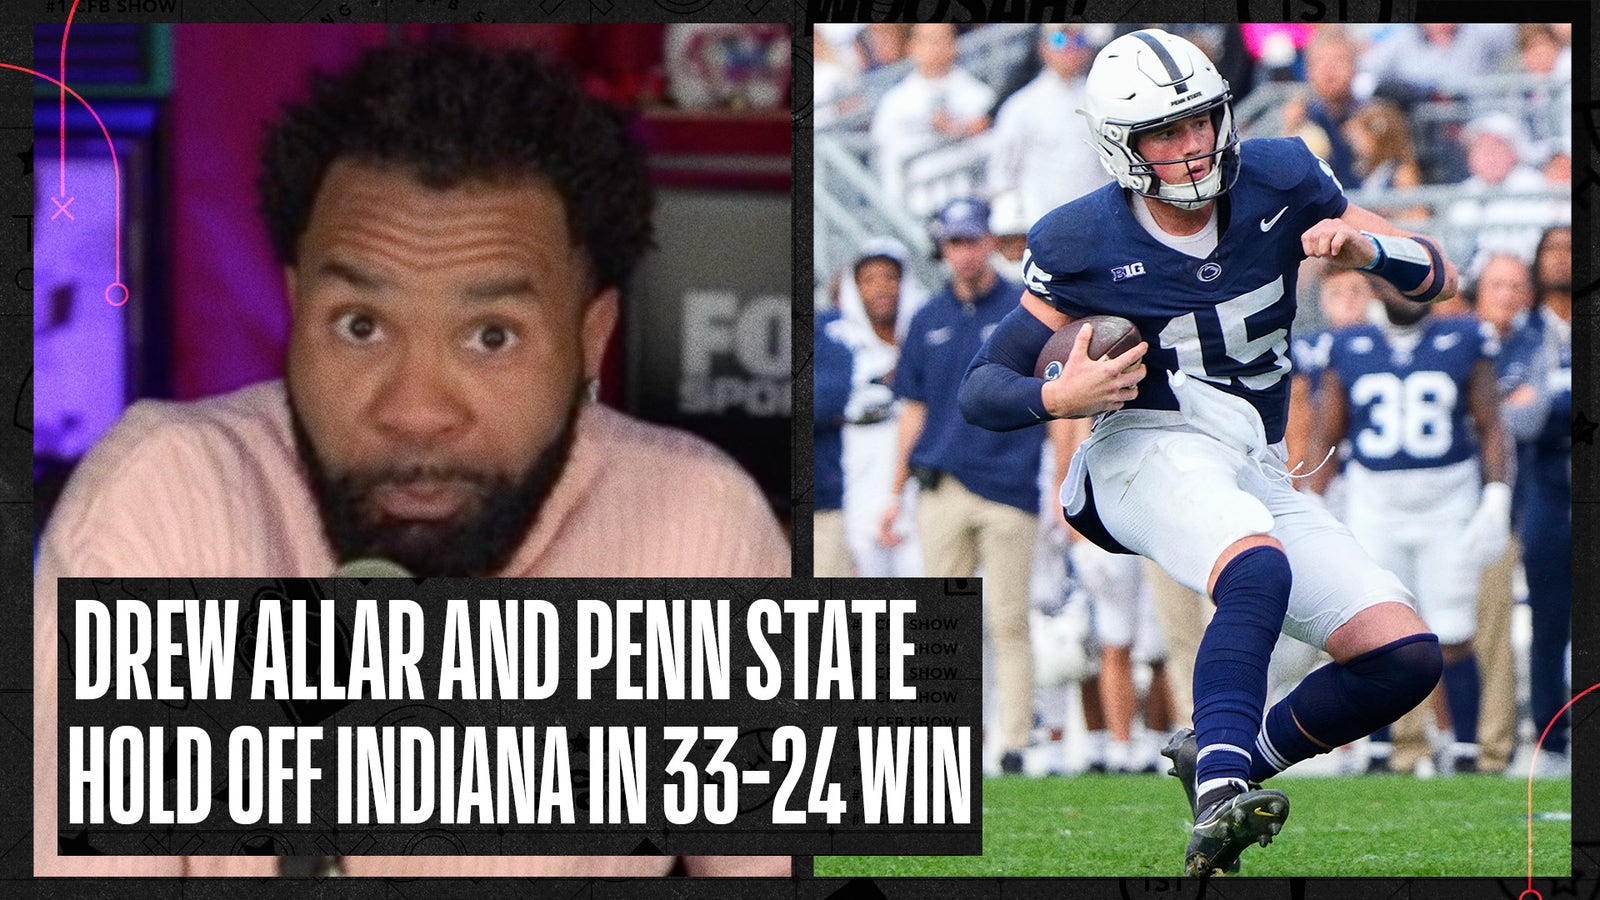 How Drew Allar saved the day for Penn State